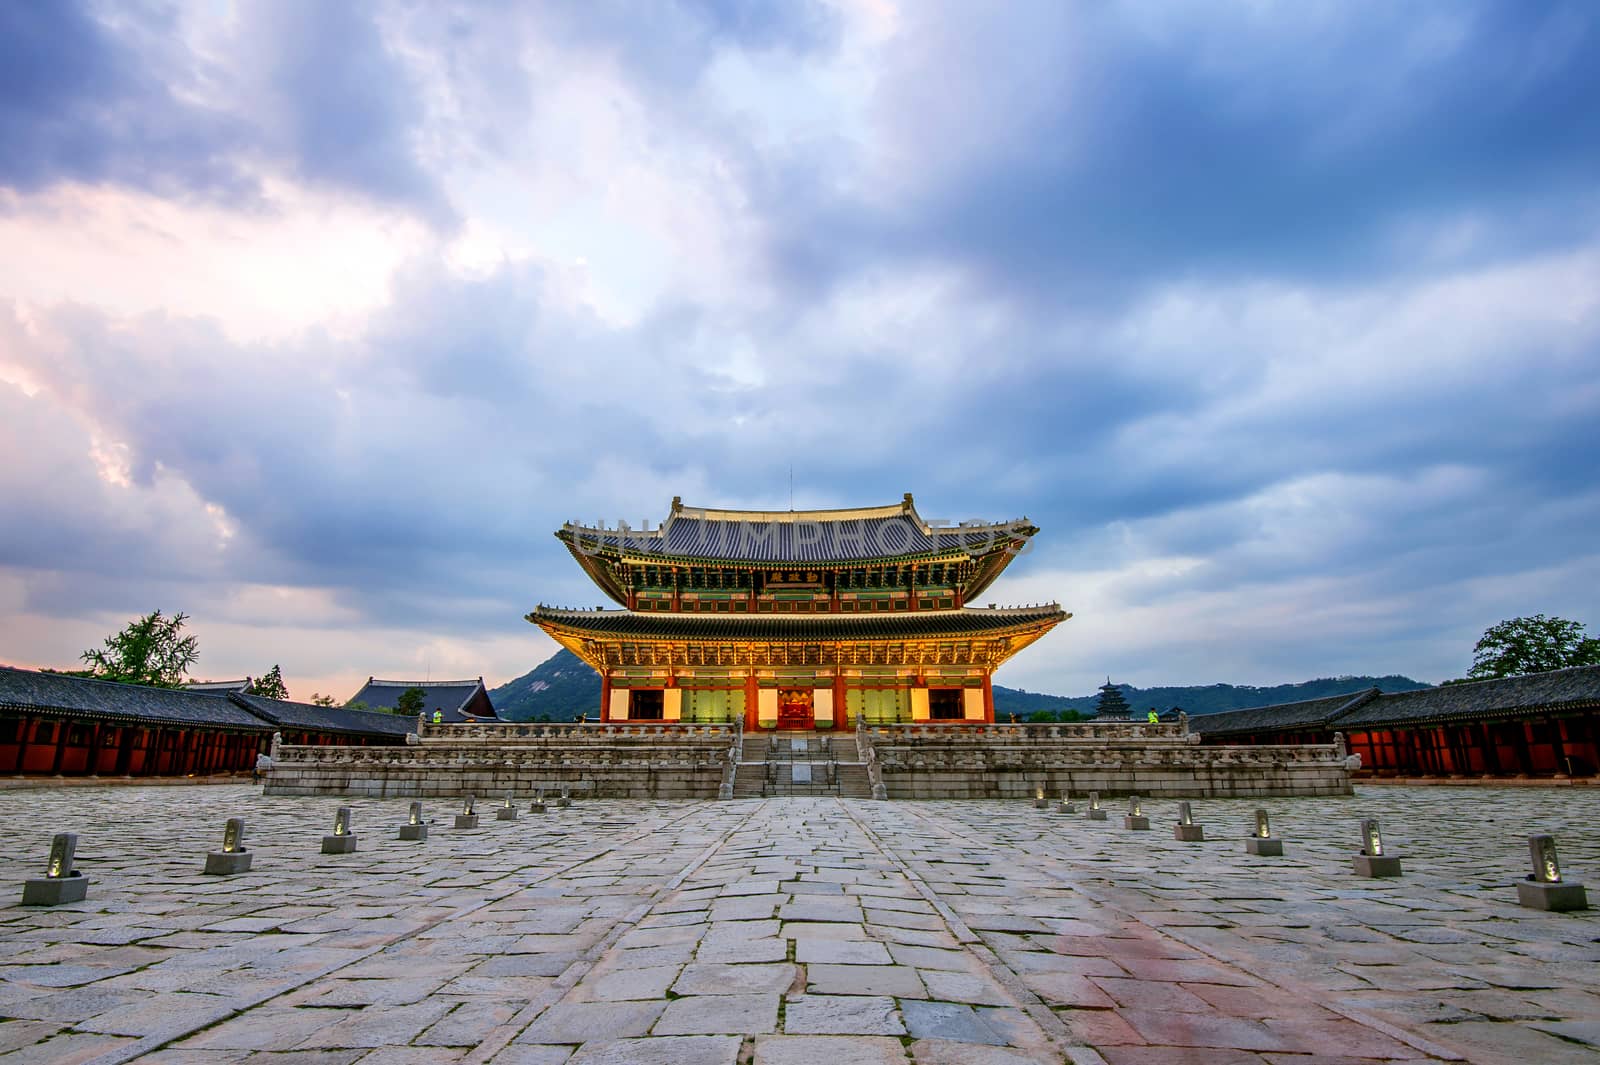 Gyeongbokgung palace at night in Seoul, South Korea. by gutarphotoghaphy